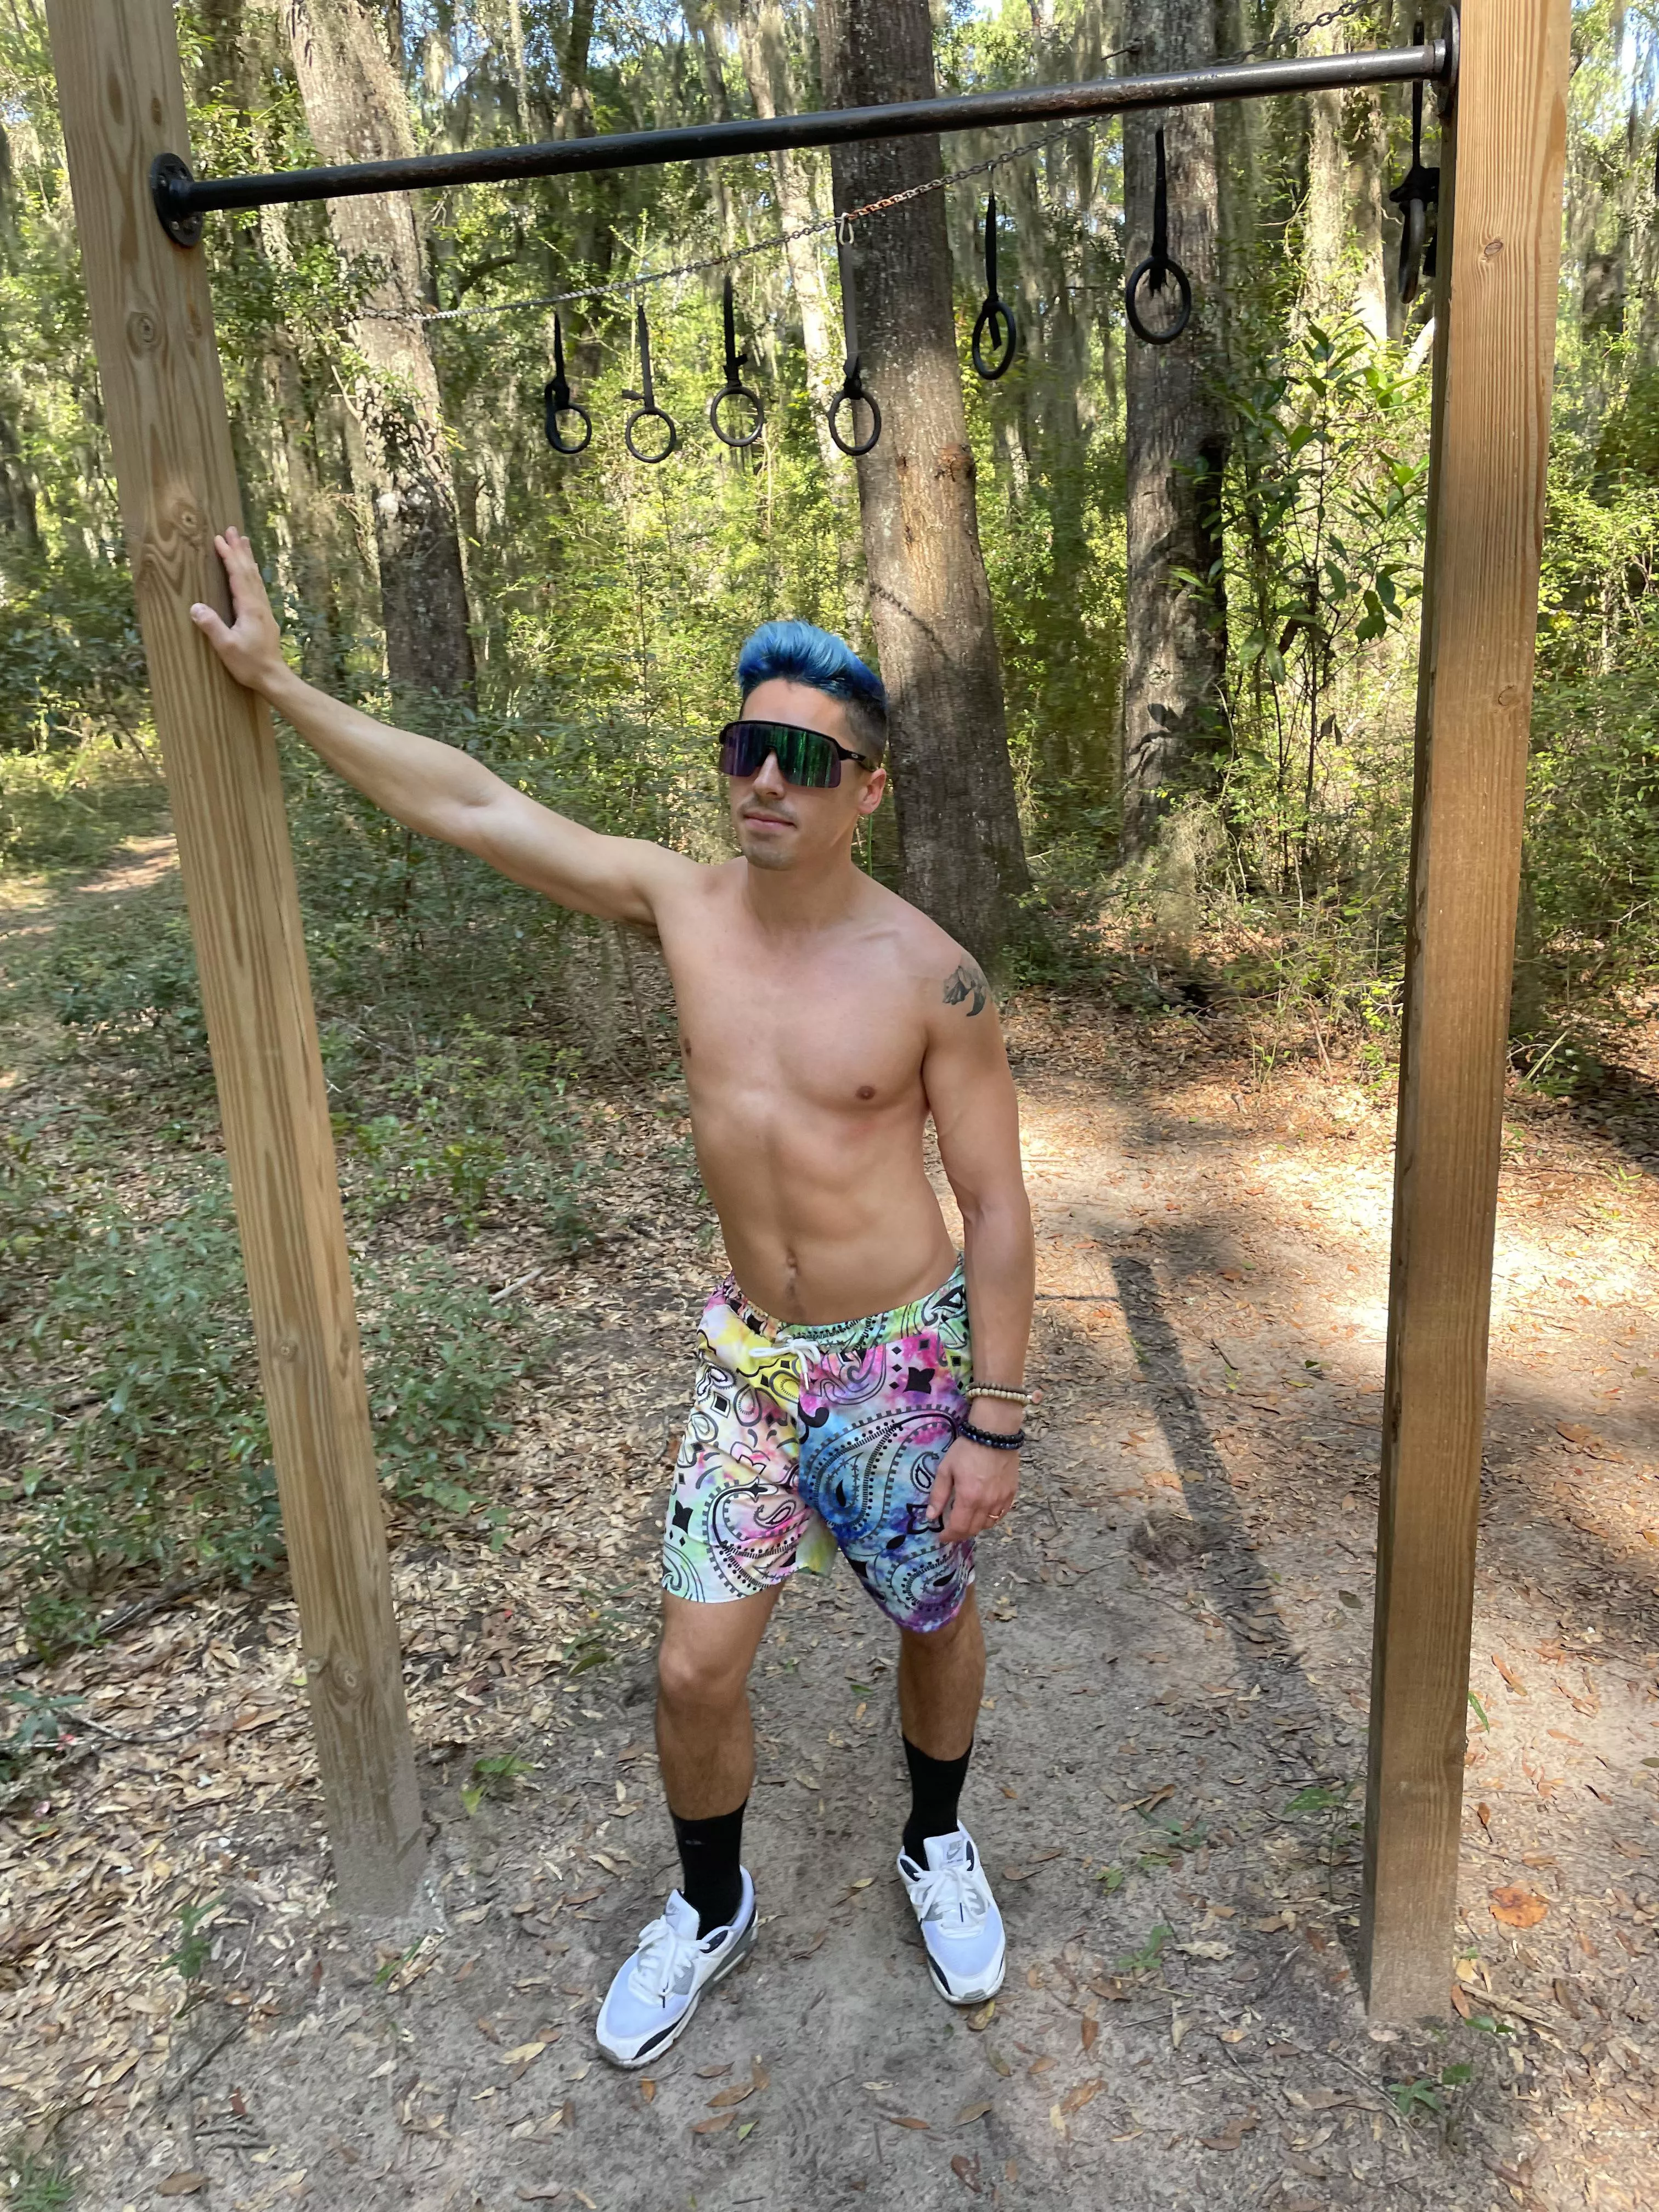 A colorful day in the Savannah Woods, stumbled upon a secret gym during our hike